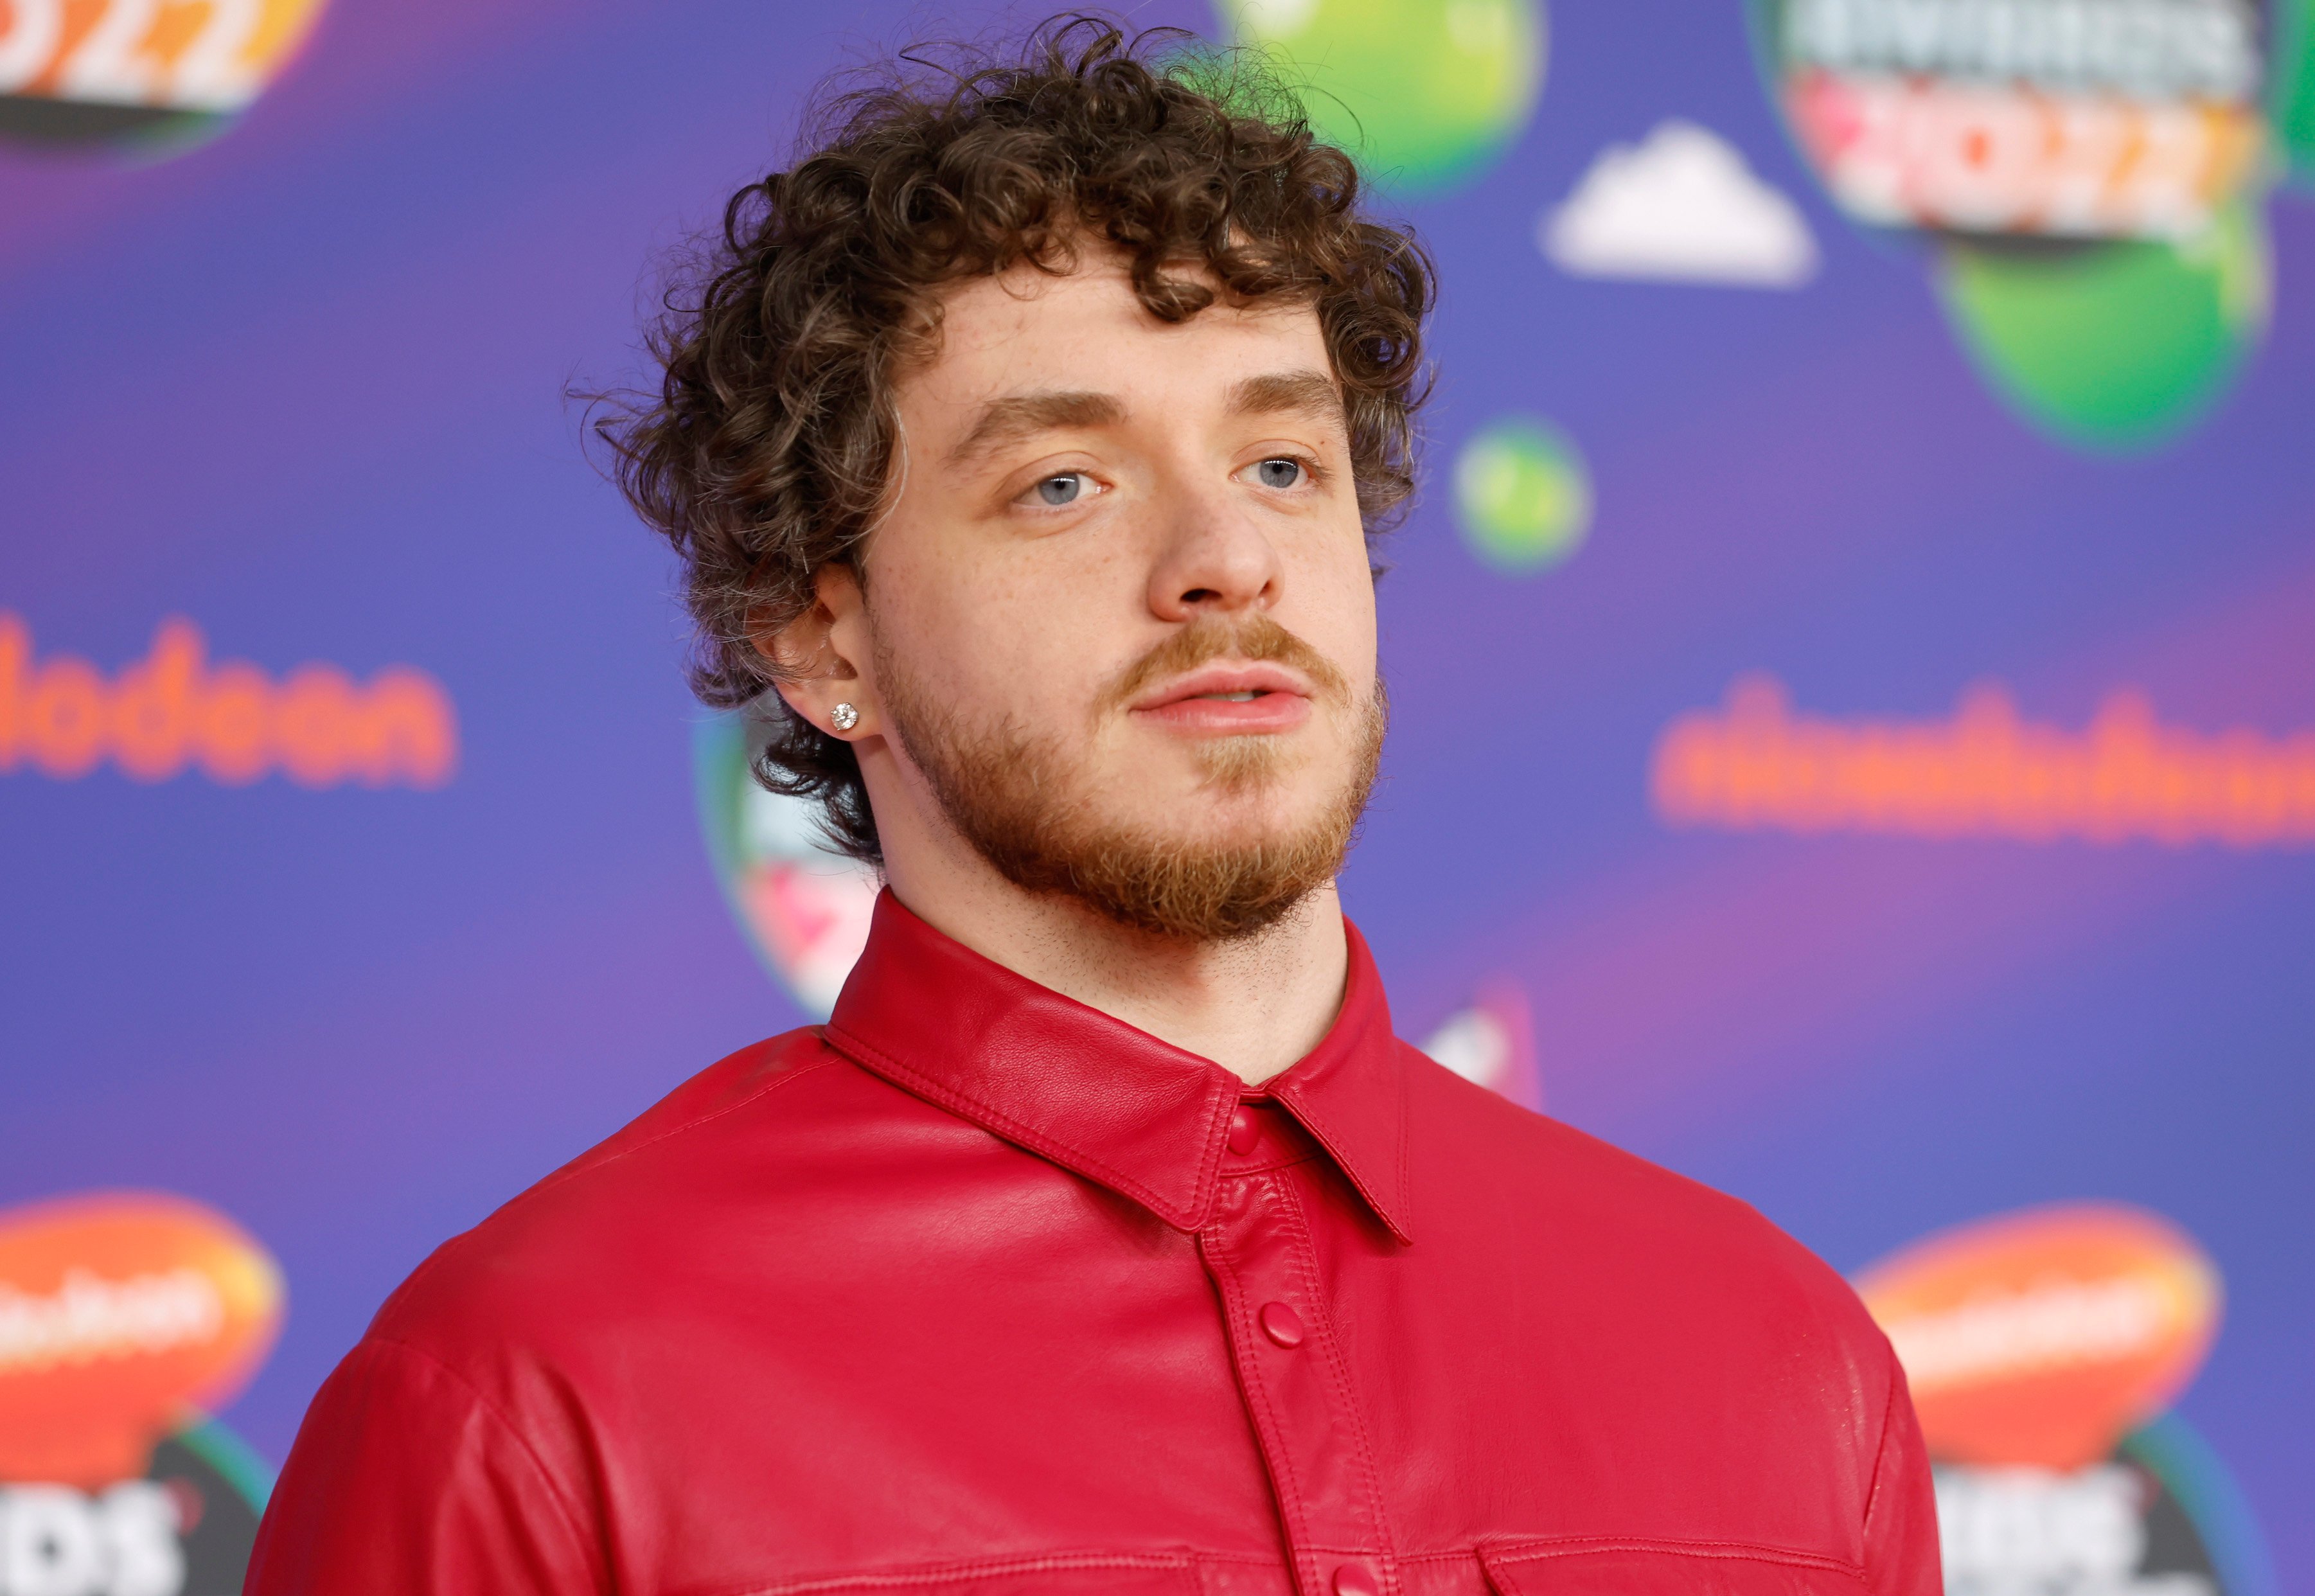 Jack Harlow attends the 2022 Nickelodeon Kid's Choice Awards